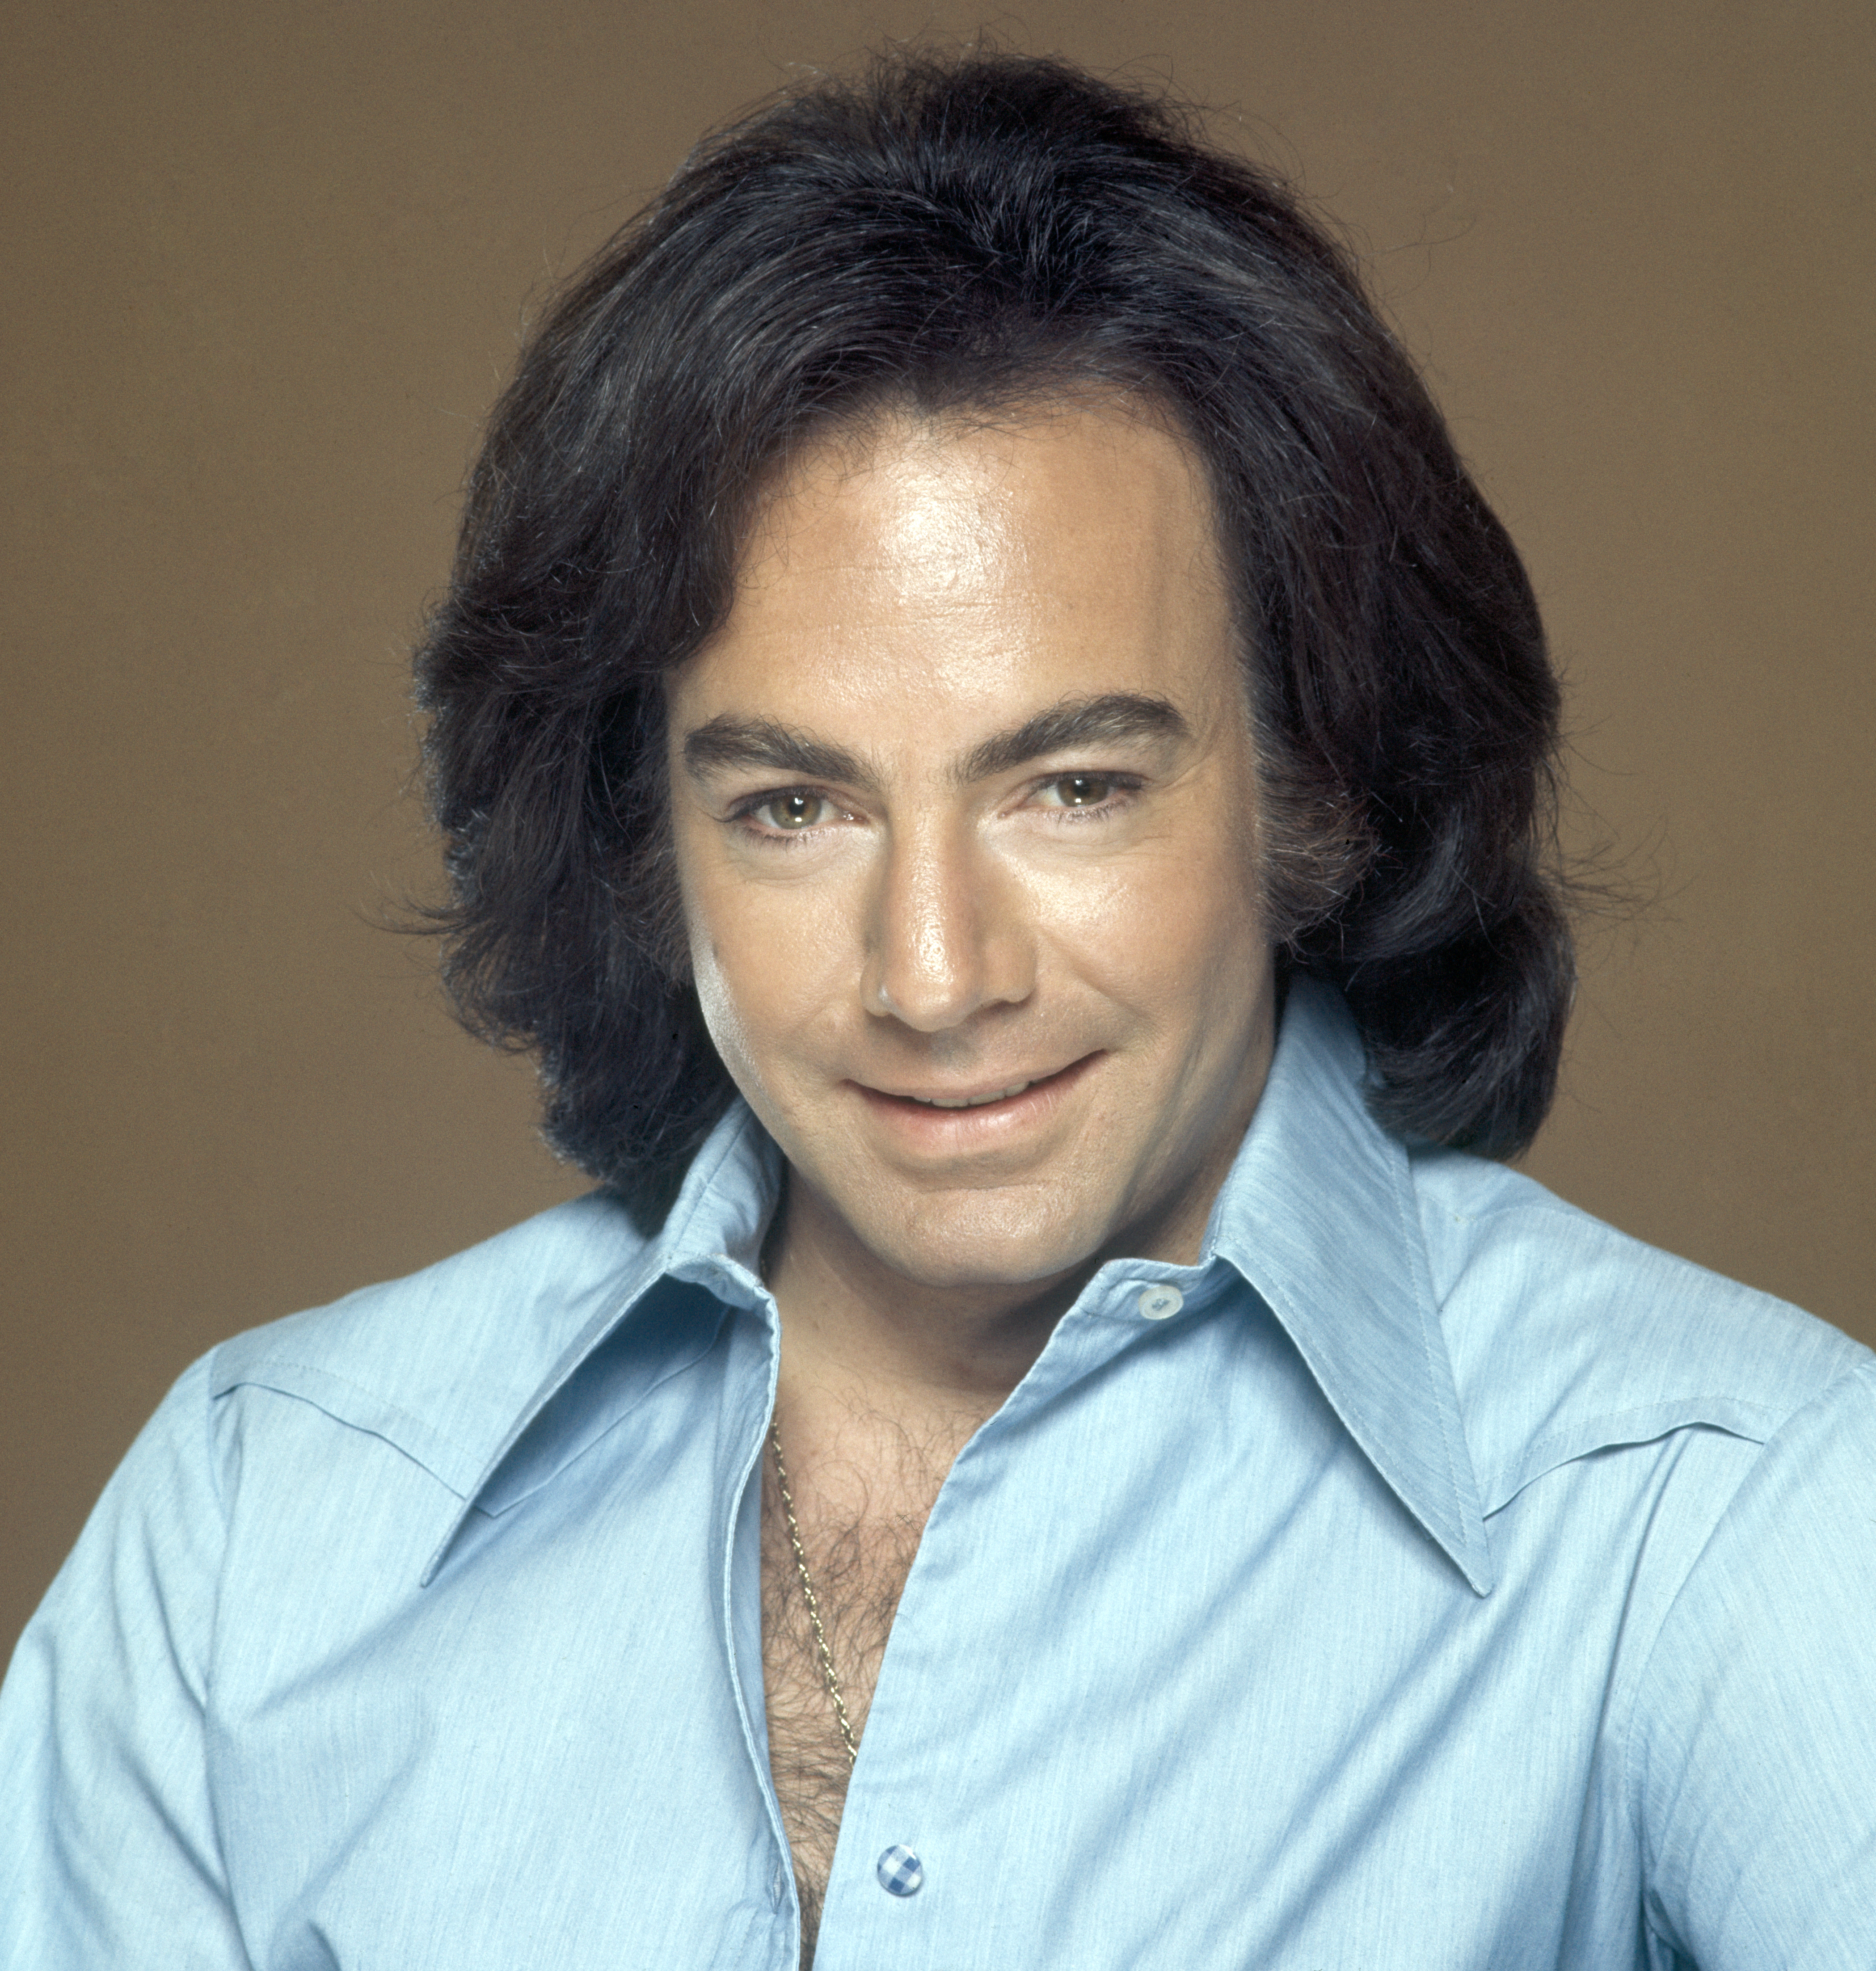 Songwriter Neil Diamond pictured on January 1, 1980 in Los Angeles, California | Source: Getty Images